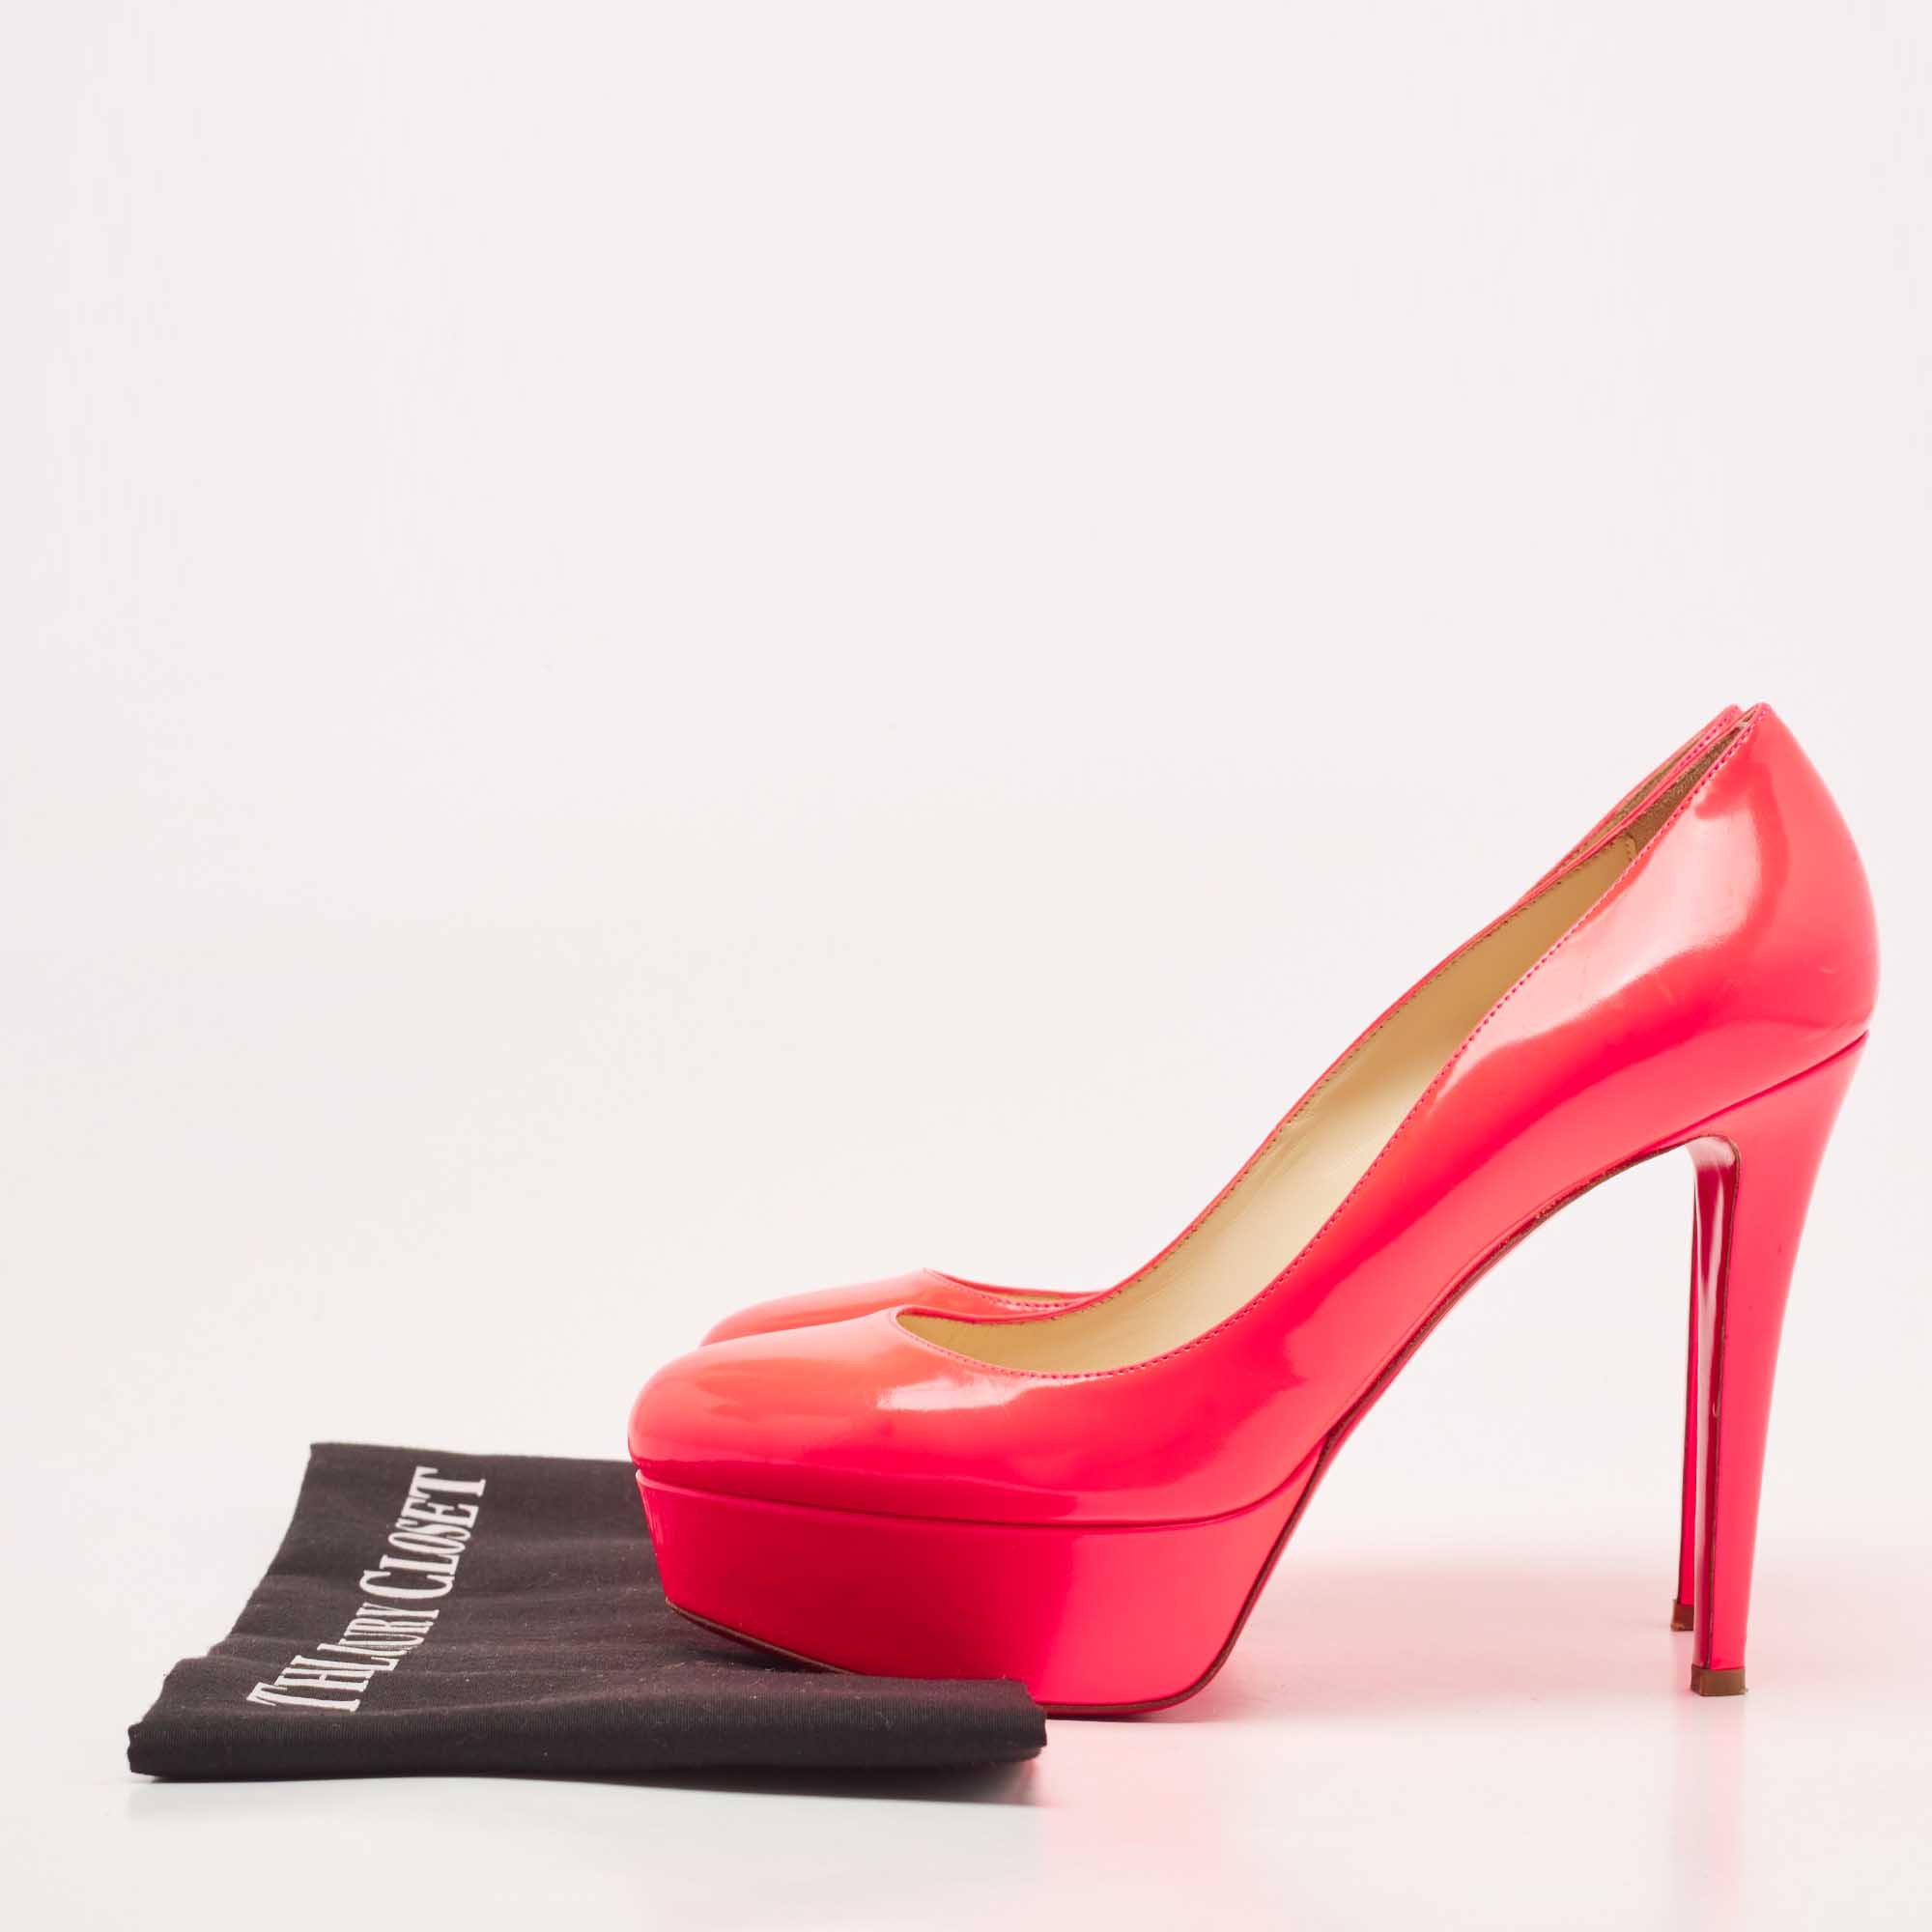 Christian Louboutin Neon Pink Leather Bianca Pumps Size 39.5